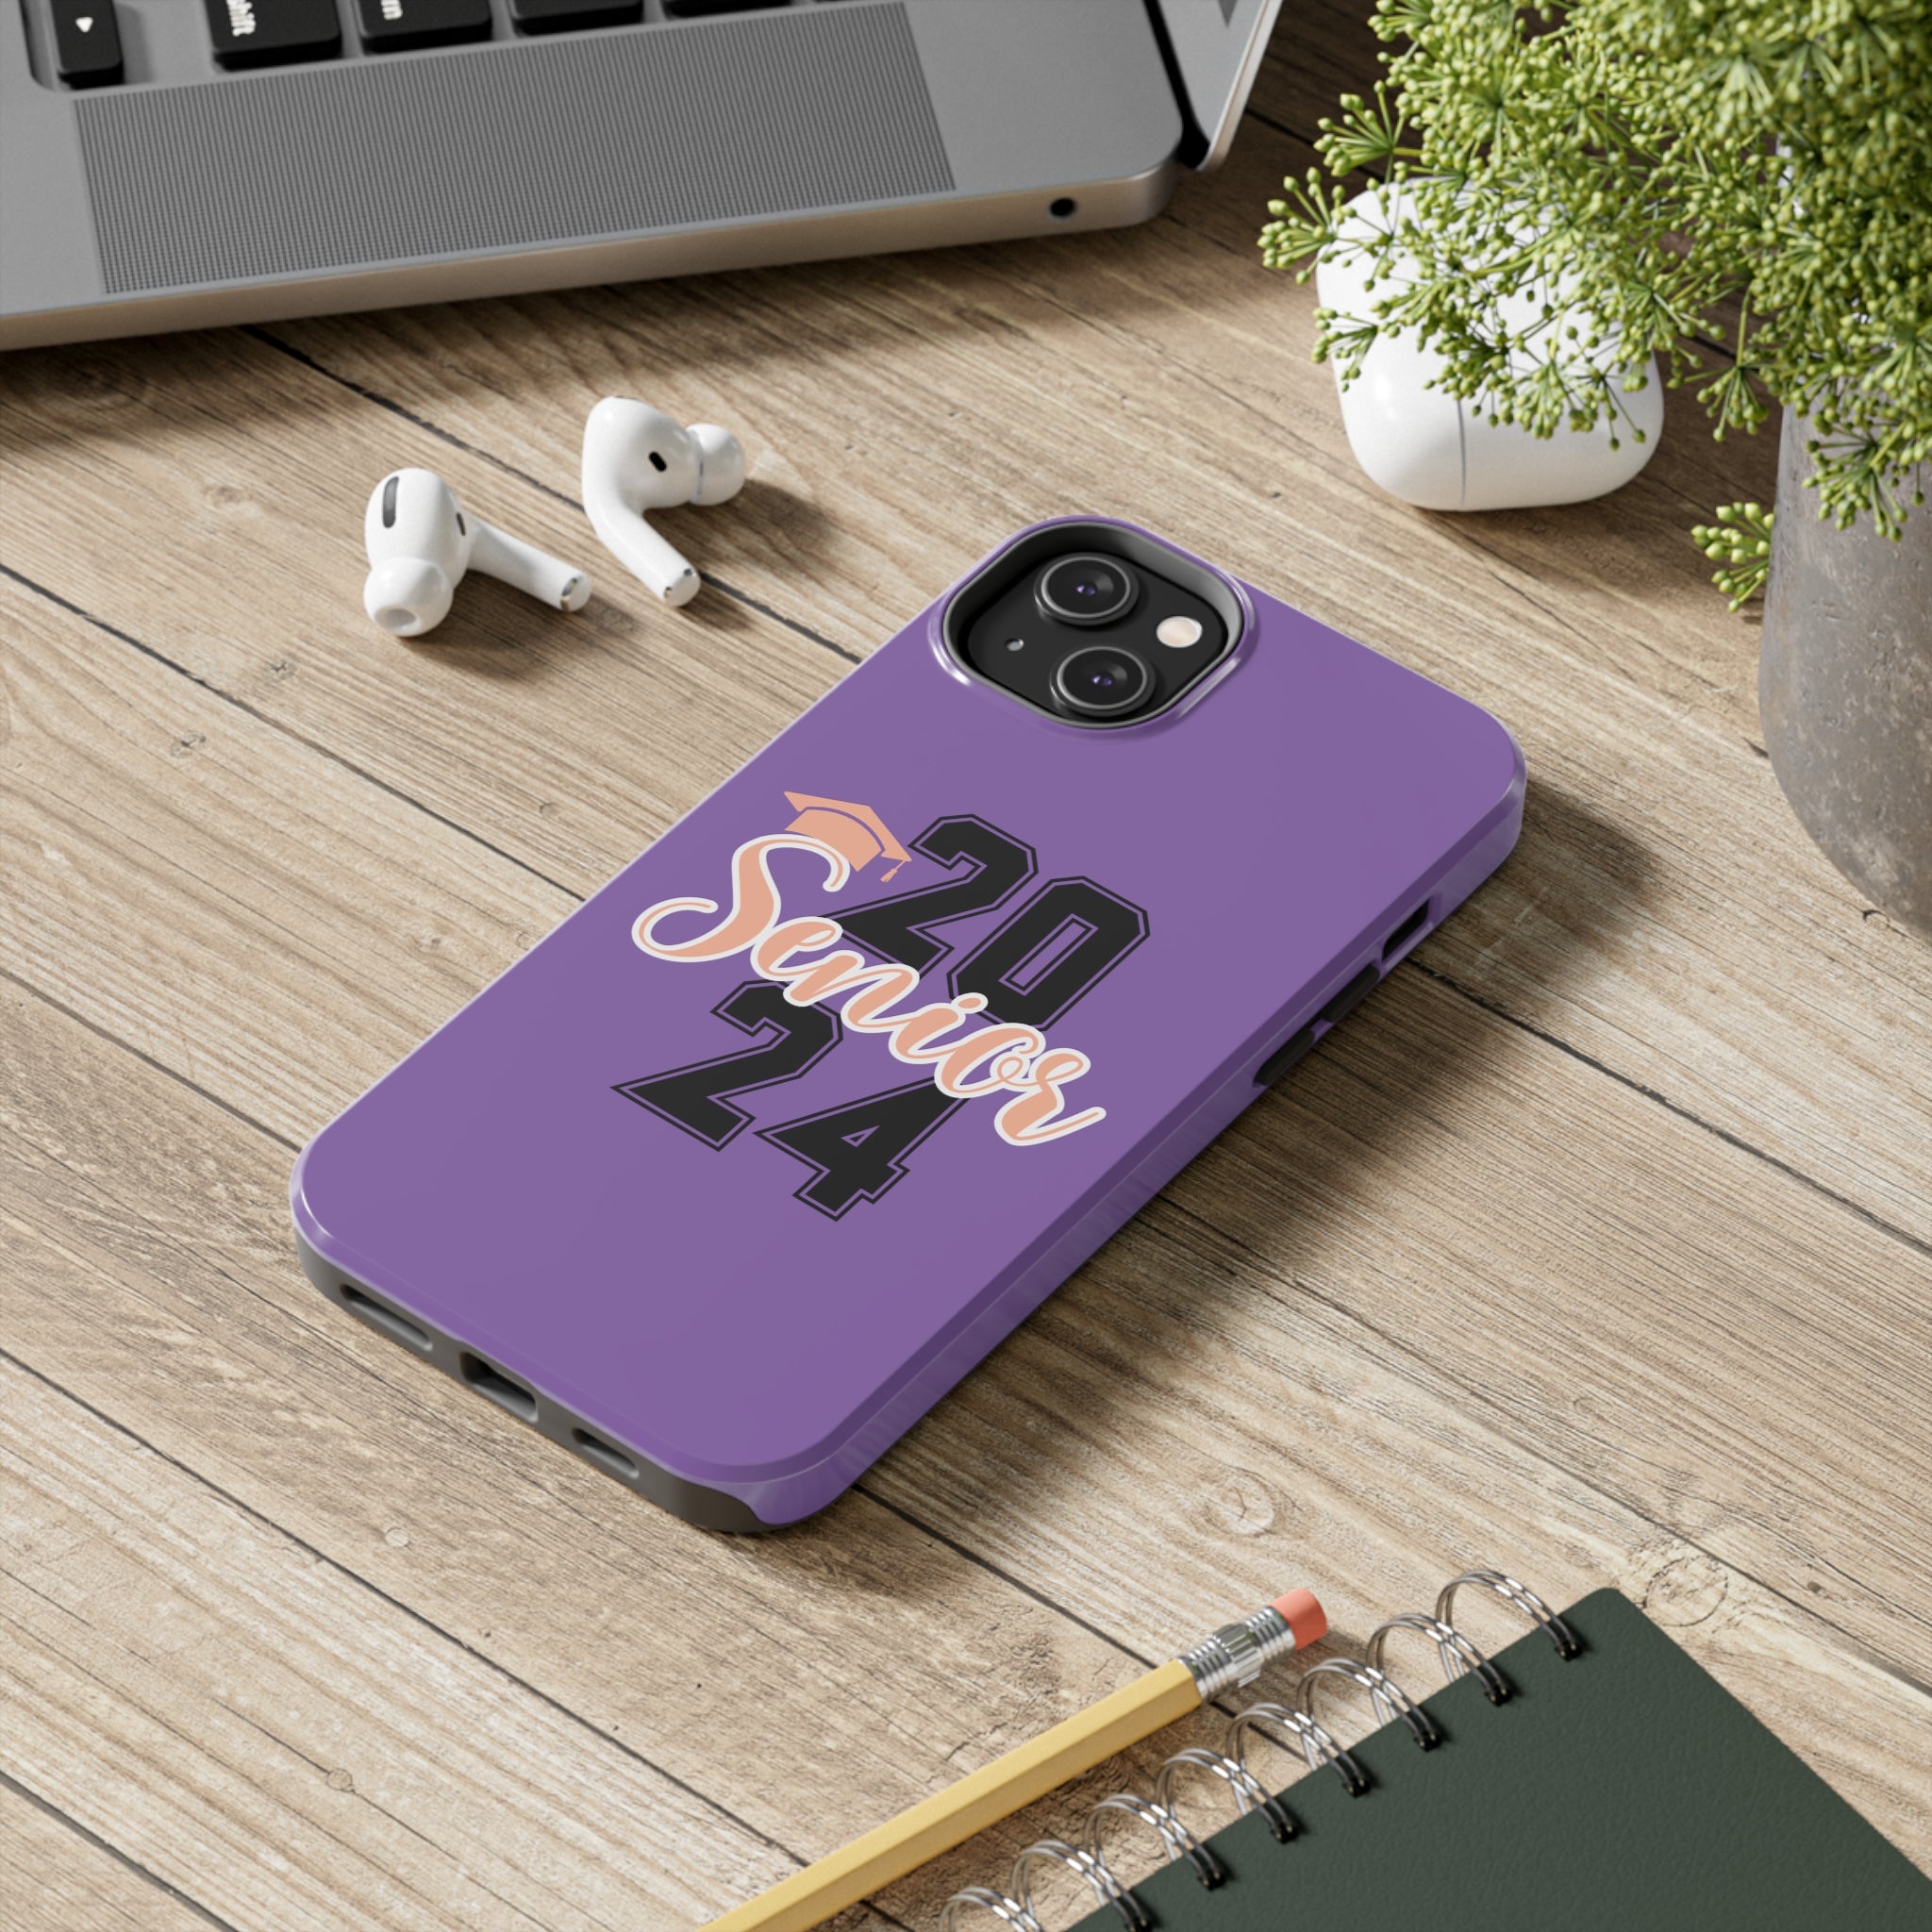 Senior Class Graduate 2024 - Tough Phone Cases - Spruced Roost